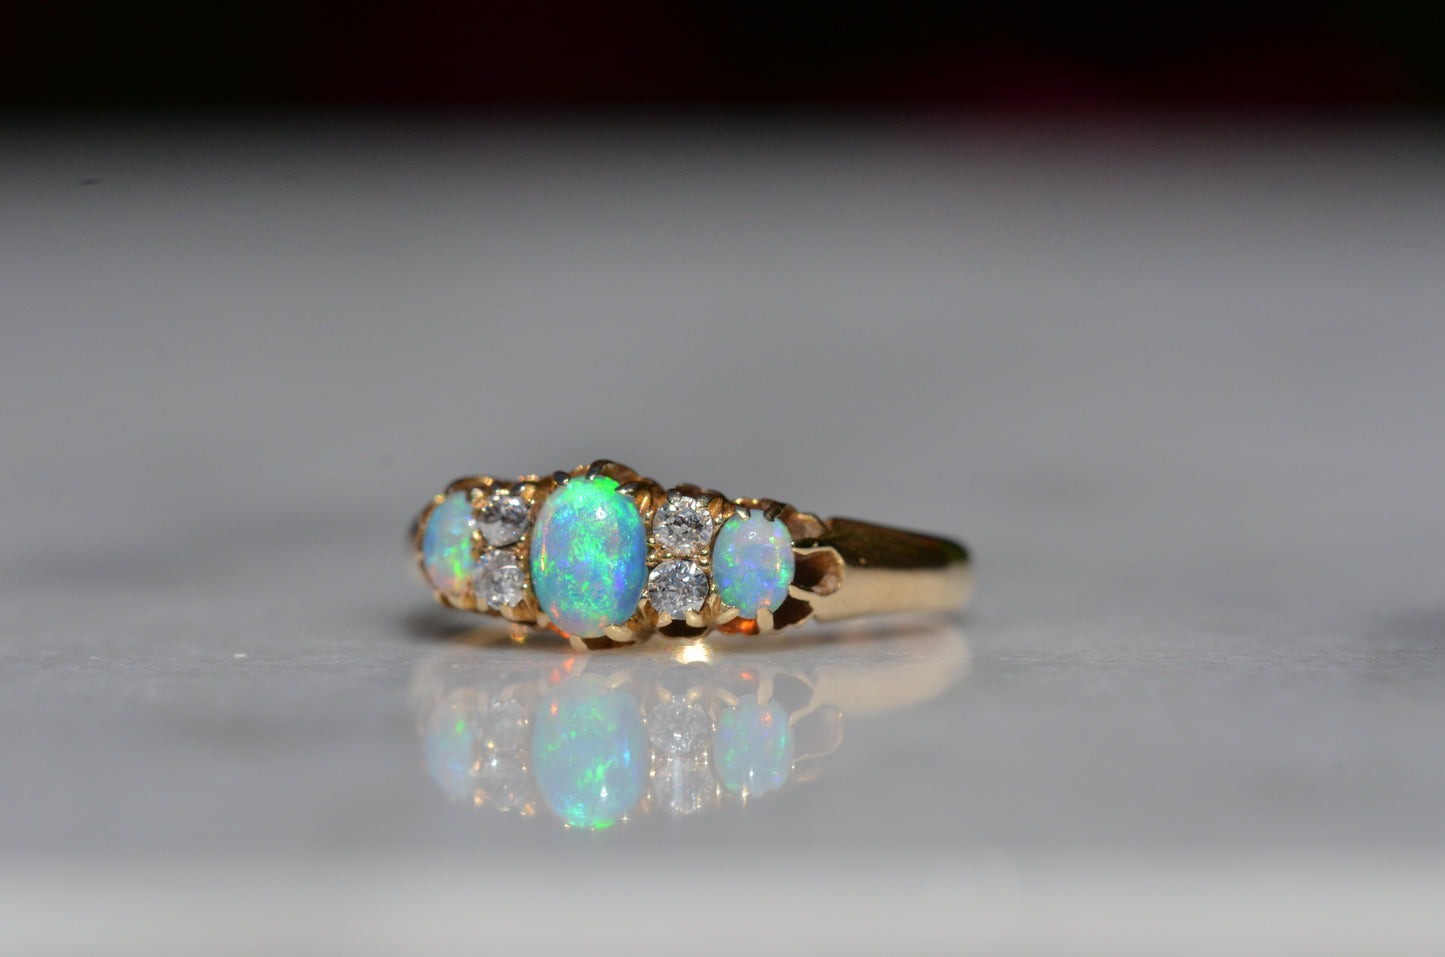 A closely-cropped macro of the Victorian ring, showcasing the strong green and blue play of color in the opals with a hint of violet and orange. The ring is photographed turned slightly to the left, so that the faceting and open culets of the old European diamonds are also visible.